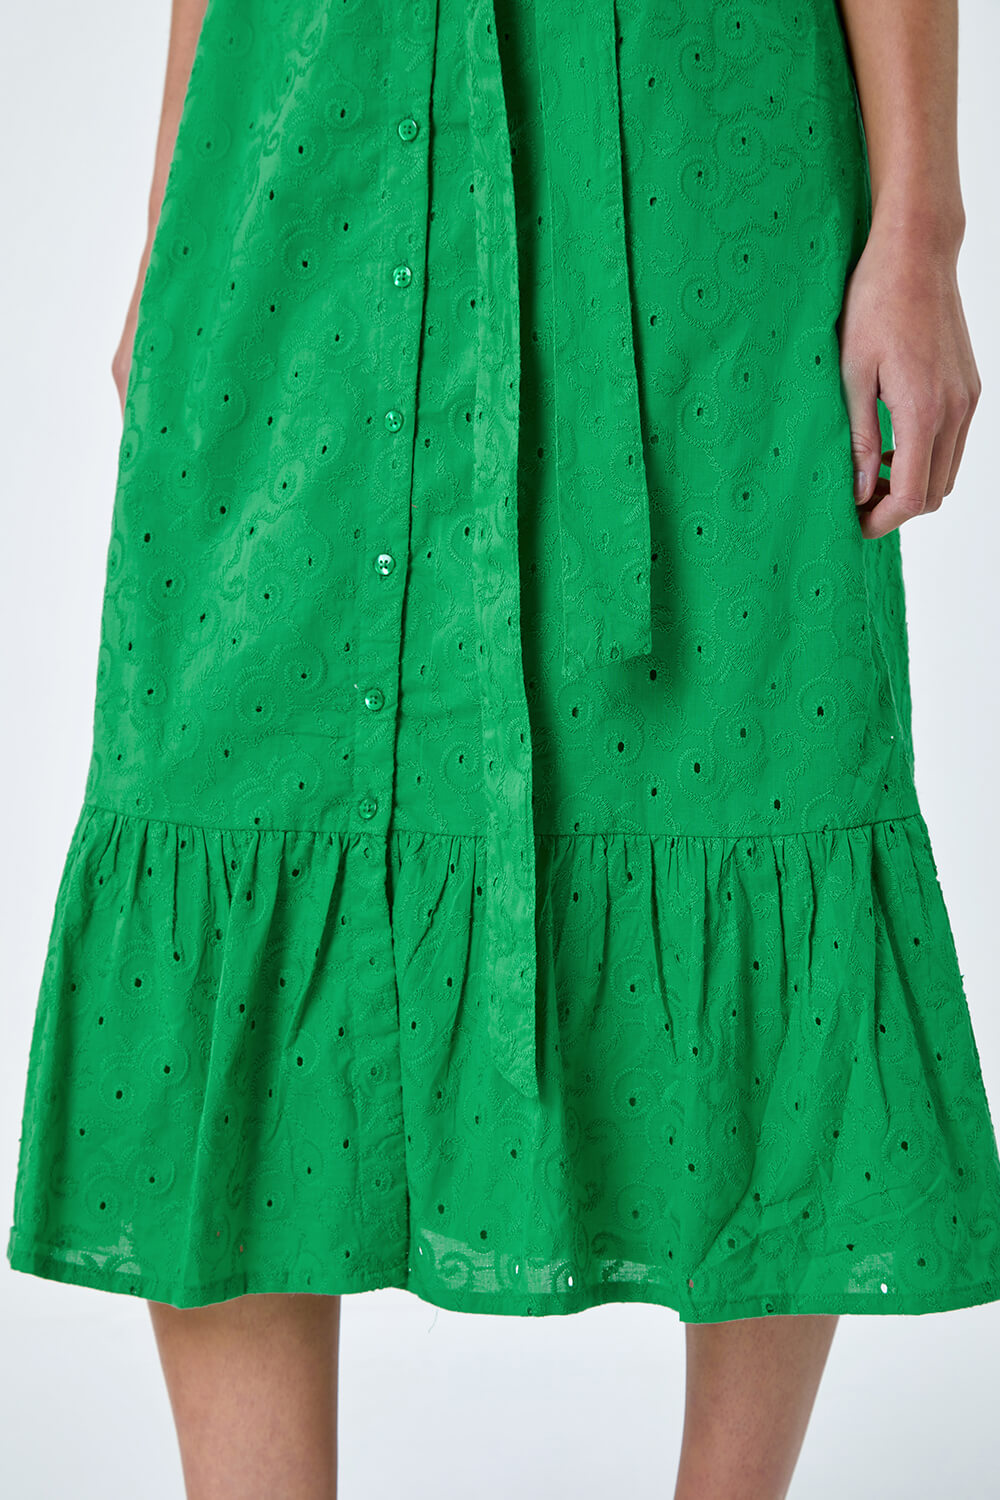 Green Petite Cotton Broderie Frill Midi Dress, Image 5 of 5